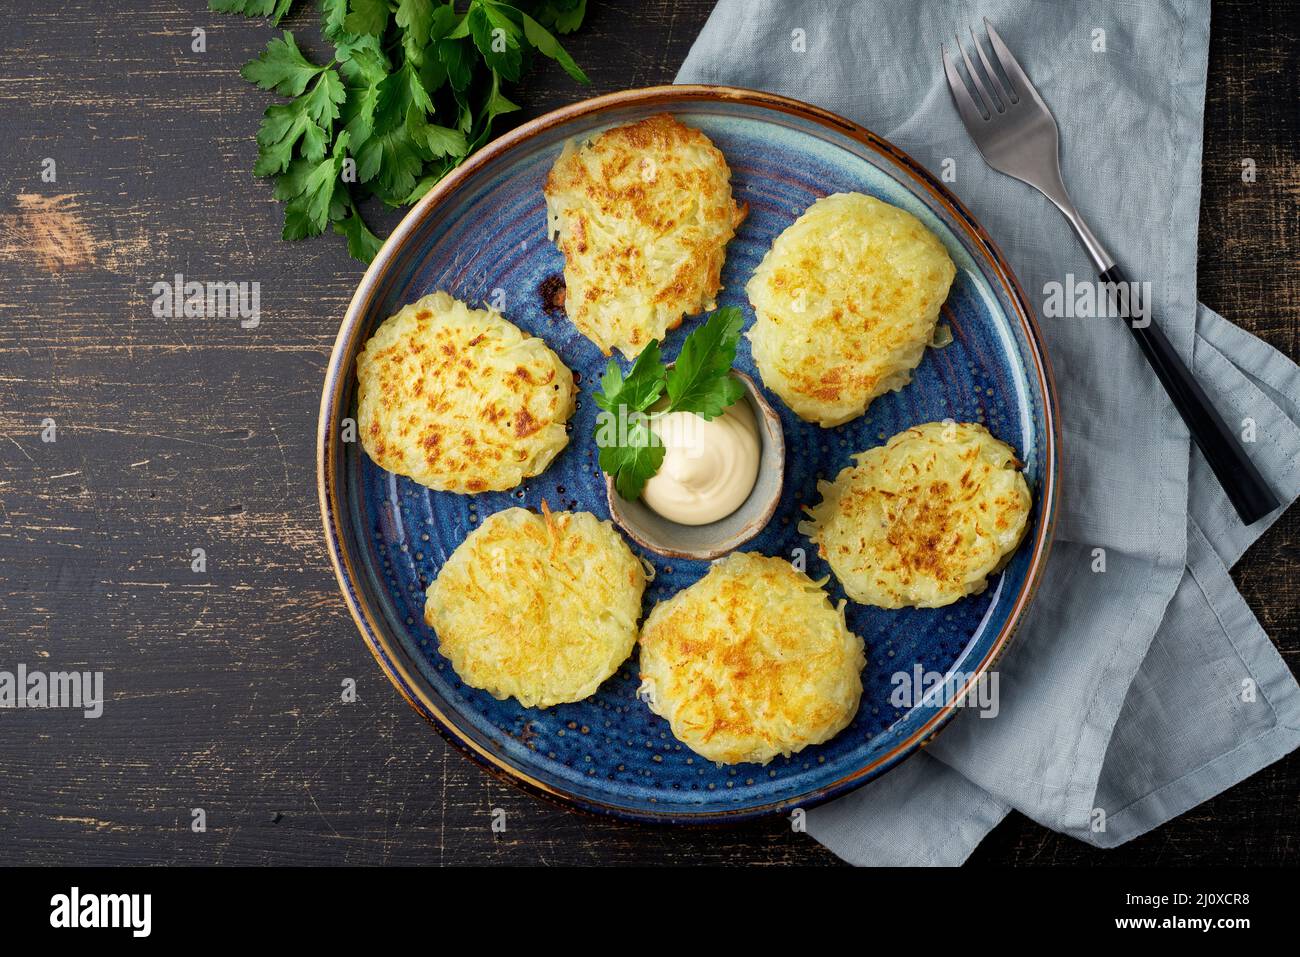 Hashbrown, hash brown potatoes fried pancakes, traditional american cuisine. Stock Photo